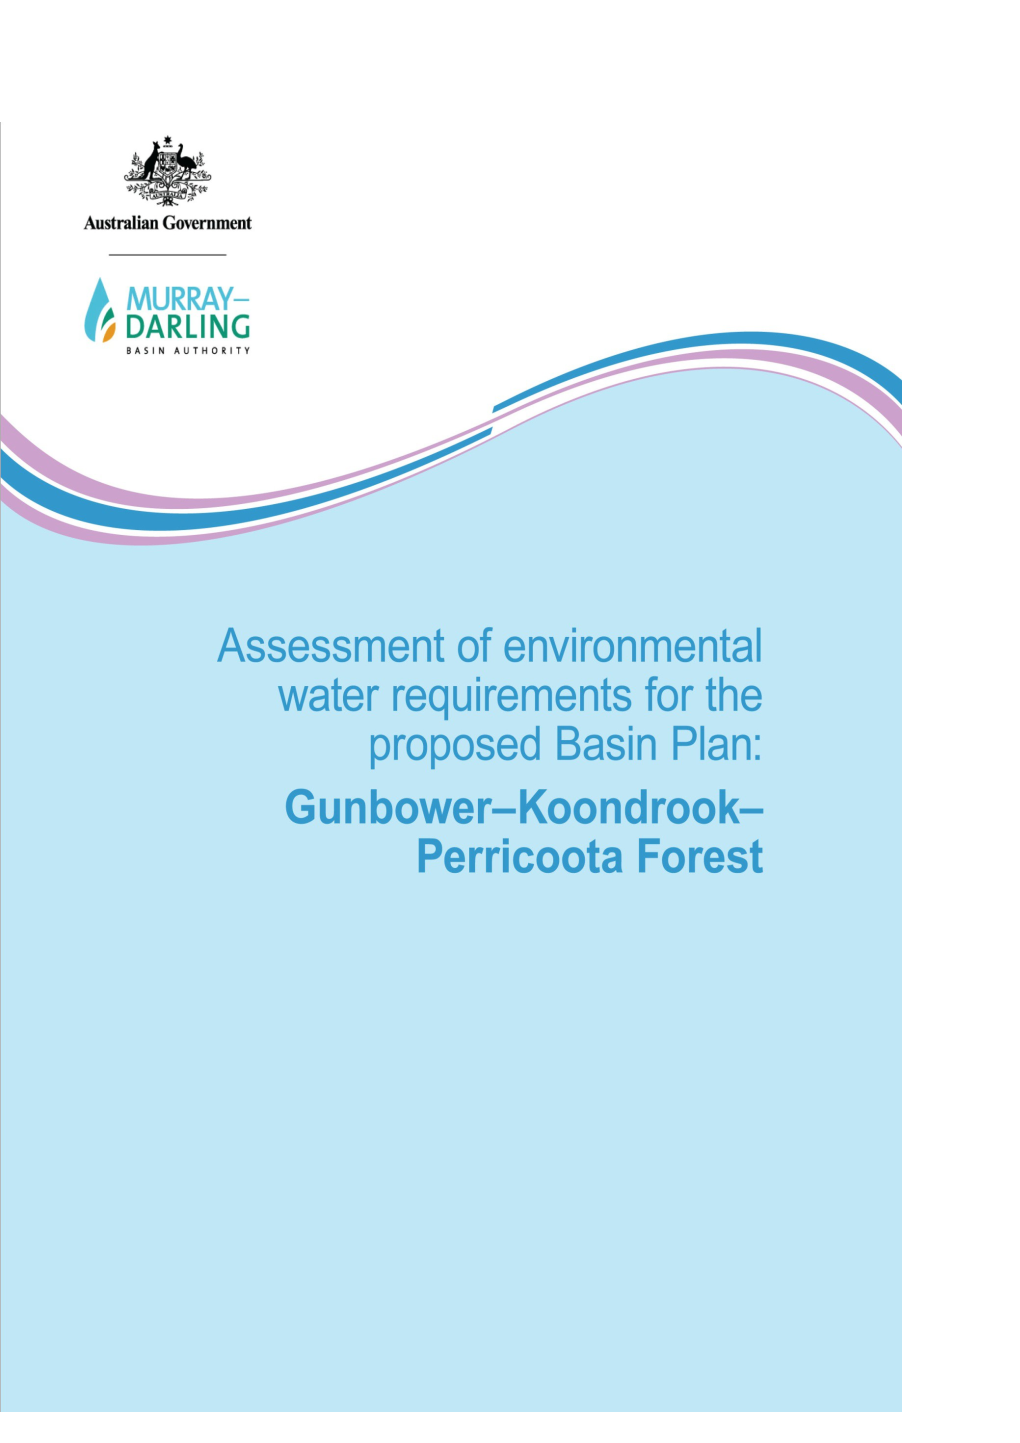 Assessment of Environmental Water Requirements for the Proposed Basin Plan: Gunbower Koondrook